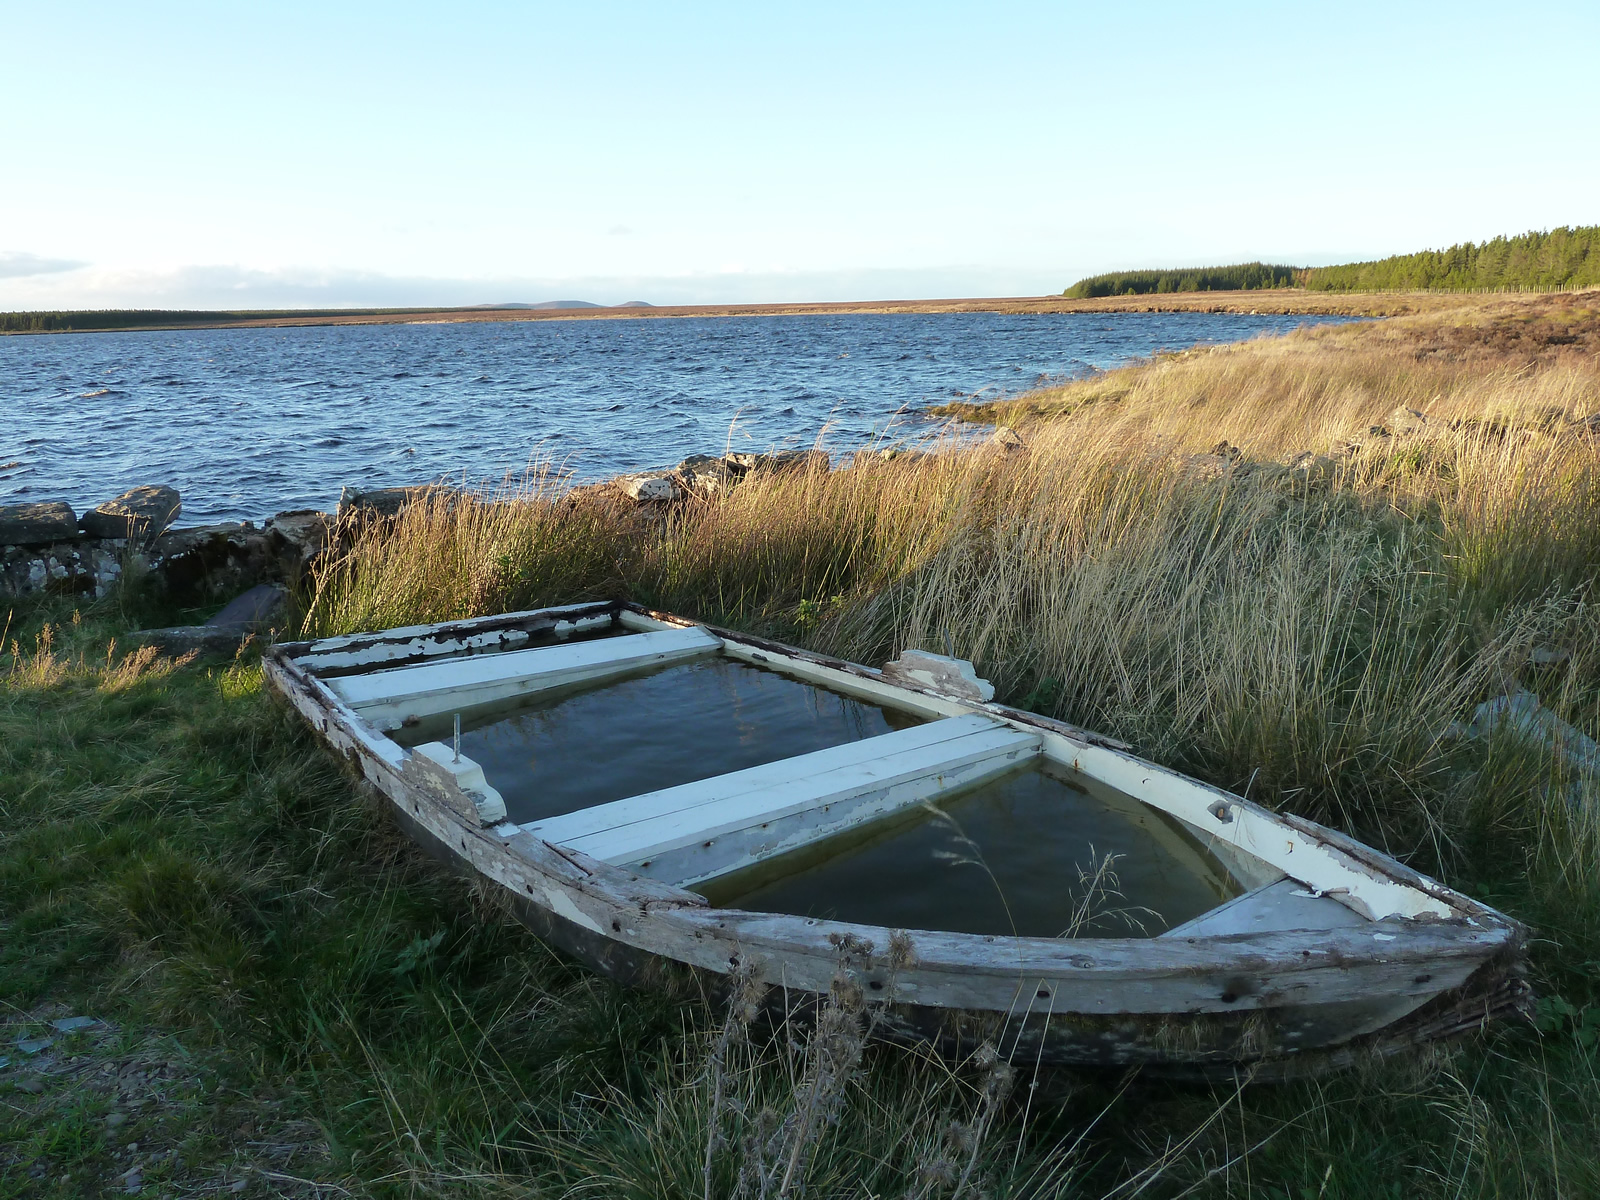 Beside the Lochmore Cottage was an old wooden boat full of water. If 